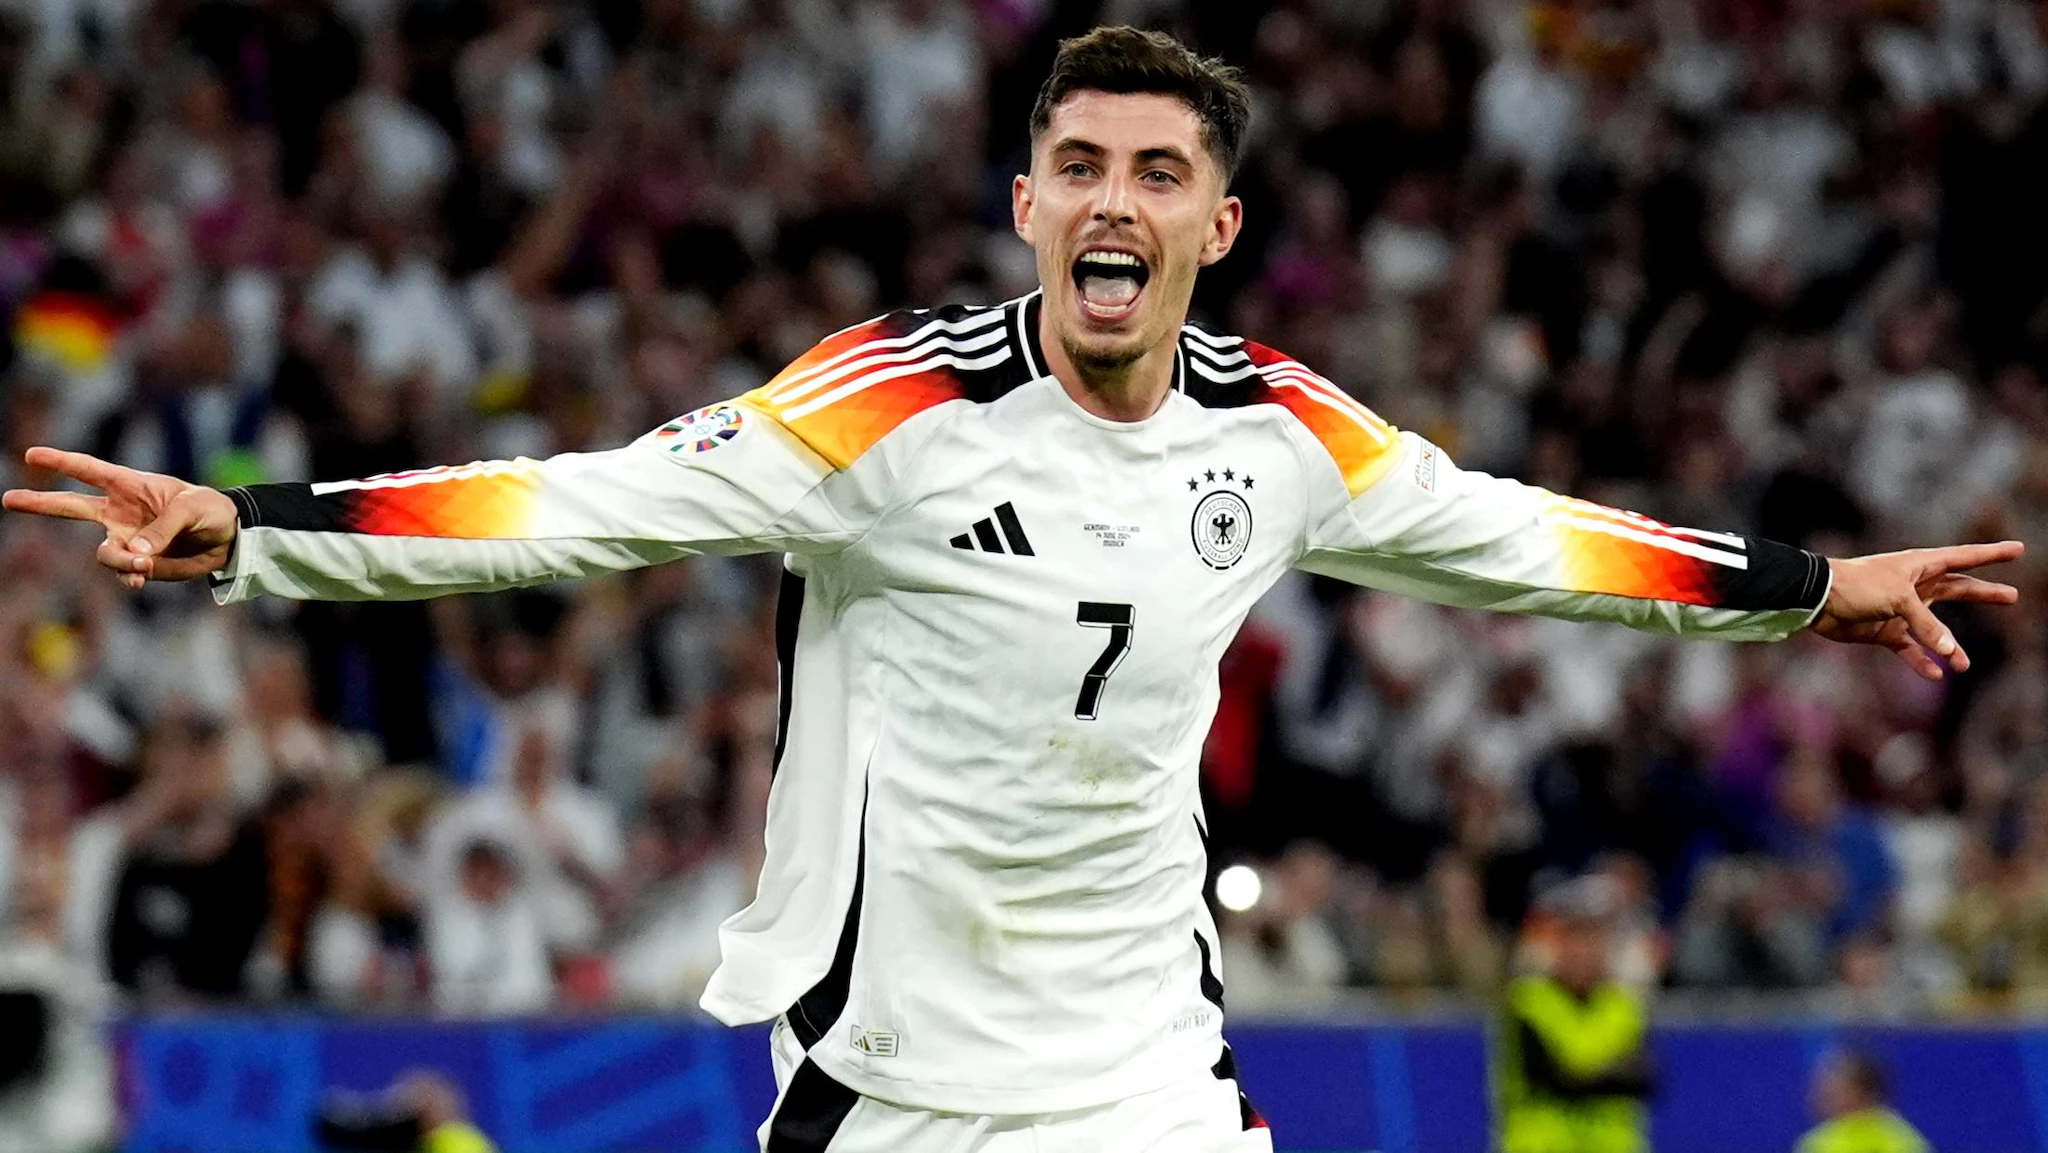 Germany will be represented in the knockouts at the Euros